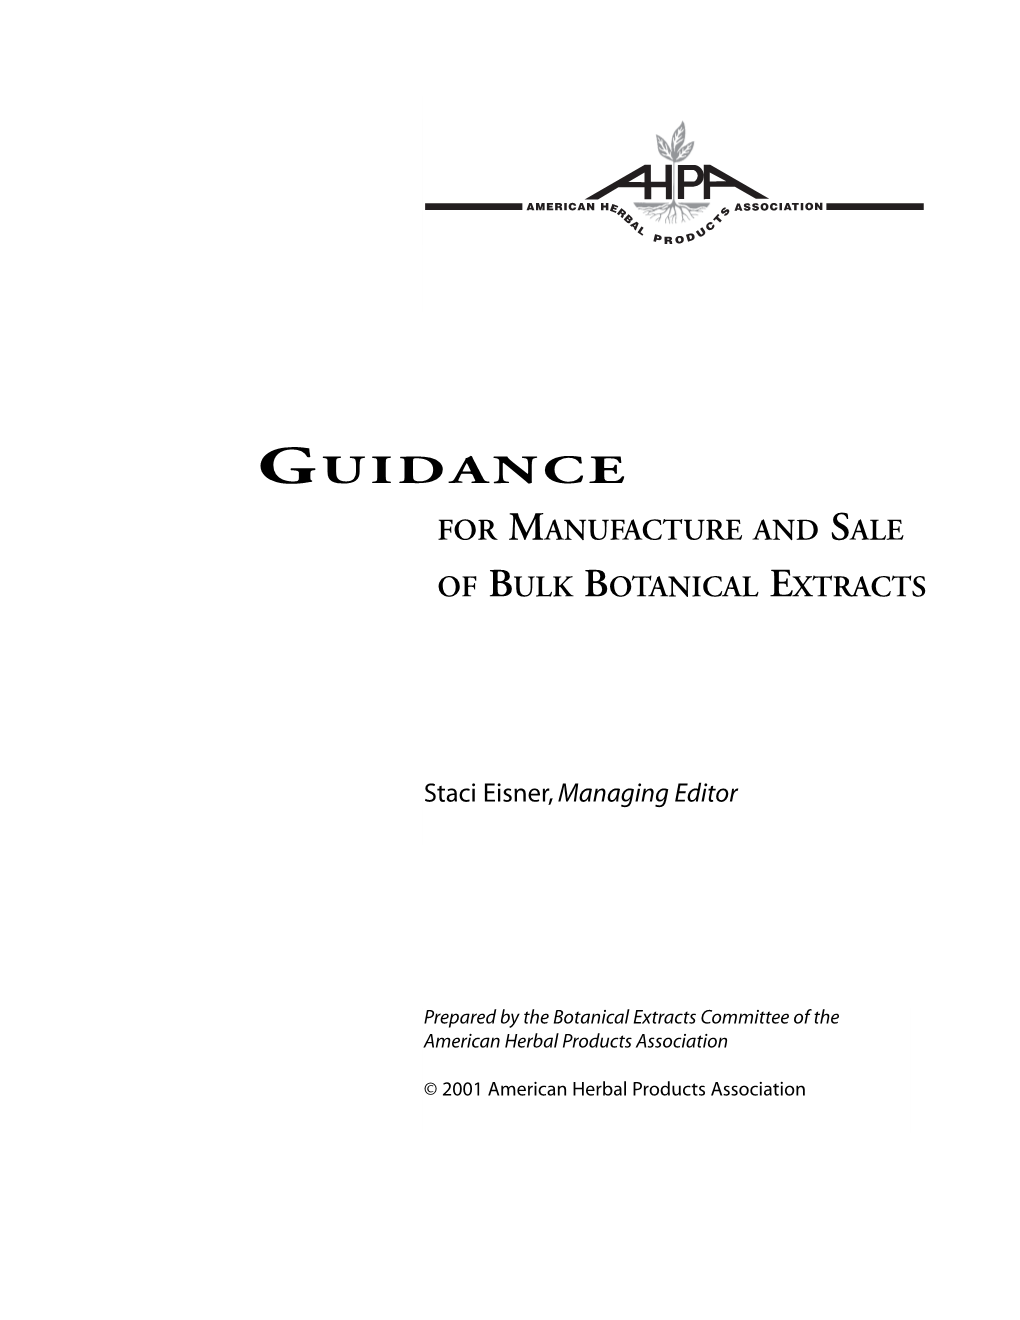 Guidance for Manufacture and Sale of Bulk Botanical Extracts